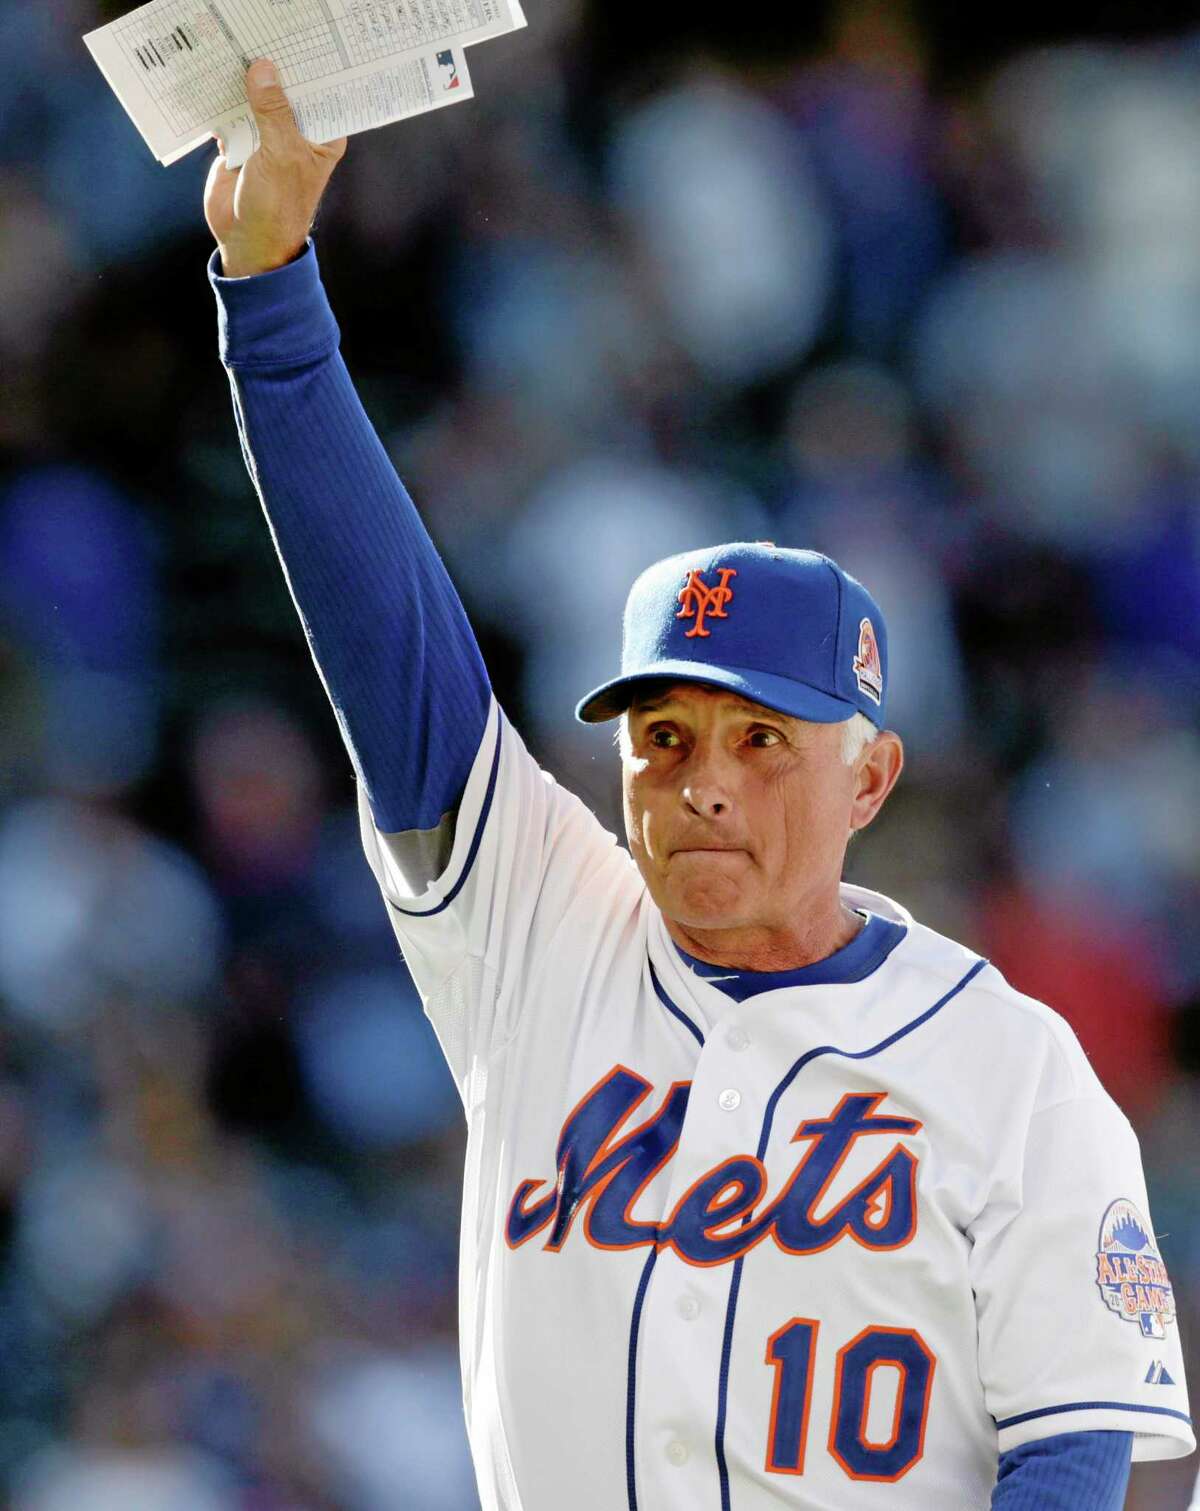 Mets manager Terry Collins (10) acknowledges the crowd after s 3-2 come-from-behind victory over the Milwaukee Brewers Sunday.